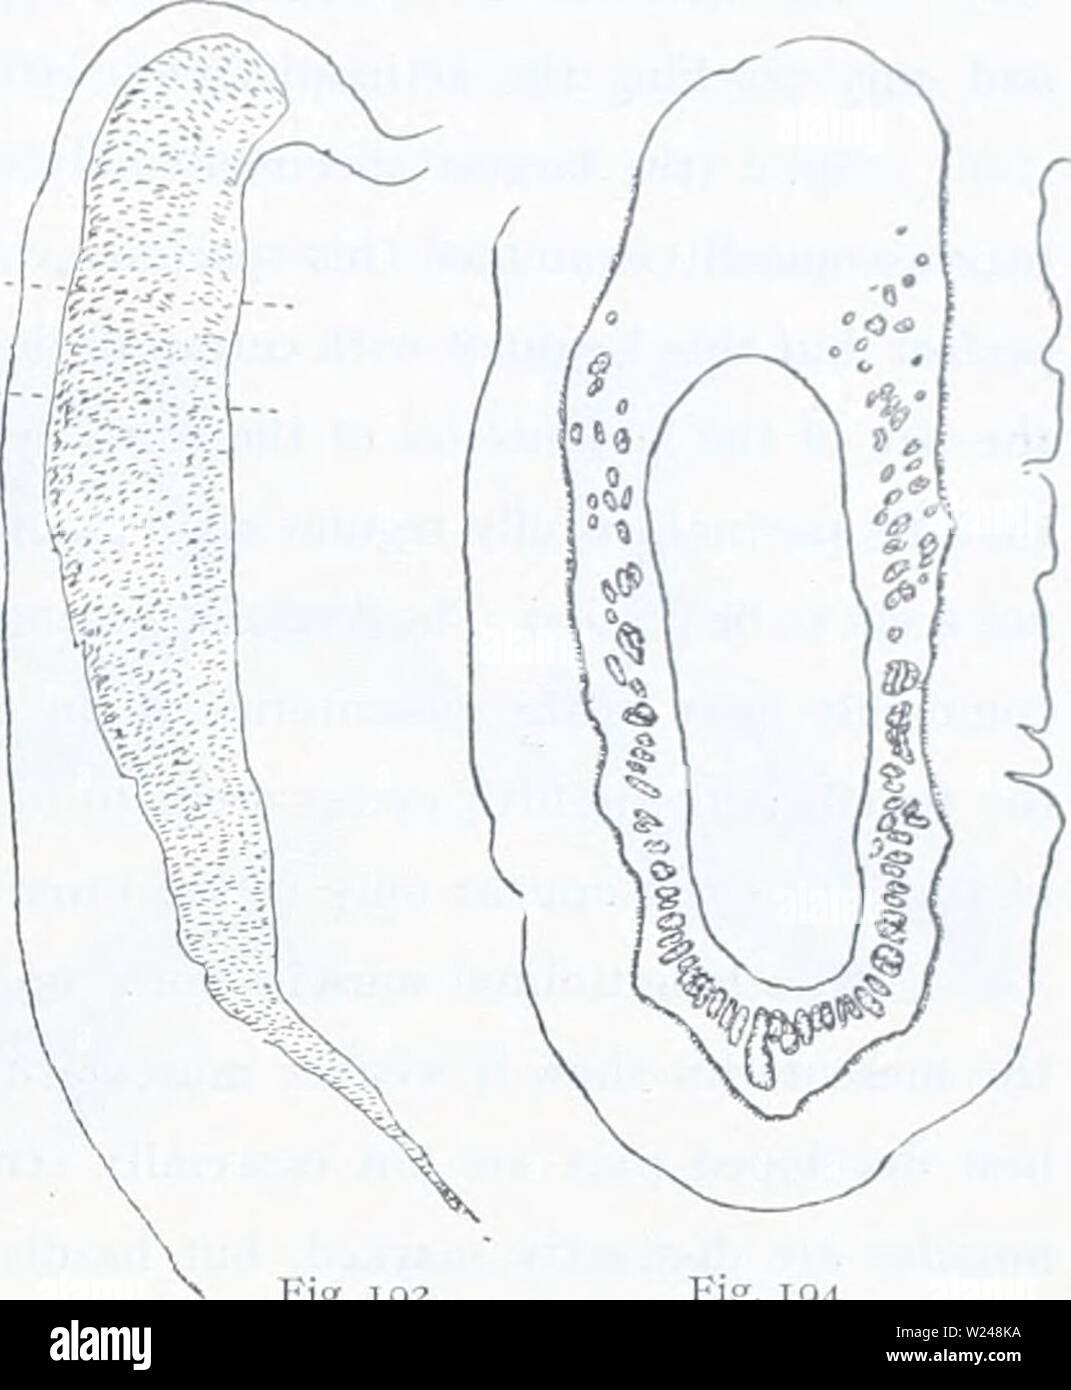 Archive image from page 216 of The Danish Ingolf-expedition (1899-1953). The Danish Ingolf-expedition  danishingolfex5cpt9daniuoft Year: 1899-1953  ACTINIARIA 203    Fig. ig2 Fig. 19.1 number of tentacles is about 96 (6 + 6 + 11 + 24 + 48), the inner are many times larger than the outer. Sometimes the tentacles are indistinctly longitudinally sulcated. The oral disc is wide, its larger part has no tentacles. It is provided with indistinct radial furrows, corresponding to the insertions of the mesenteries. Actinopharynx is of ordinary length, irregularly wrinkled and provided with 2 deep siphon Stock Photo